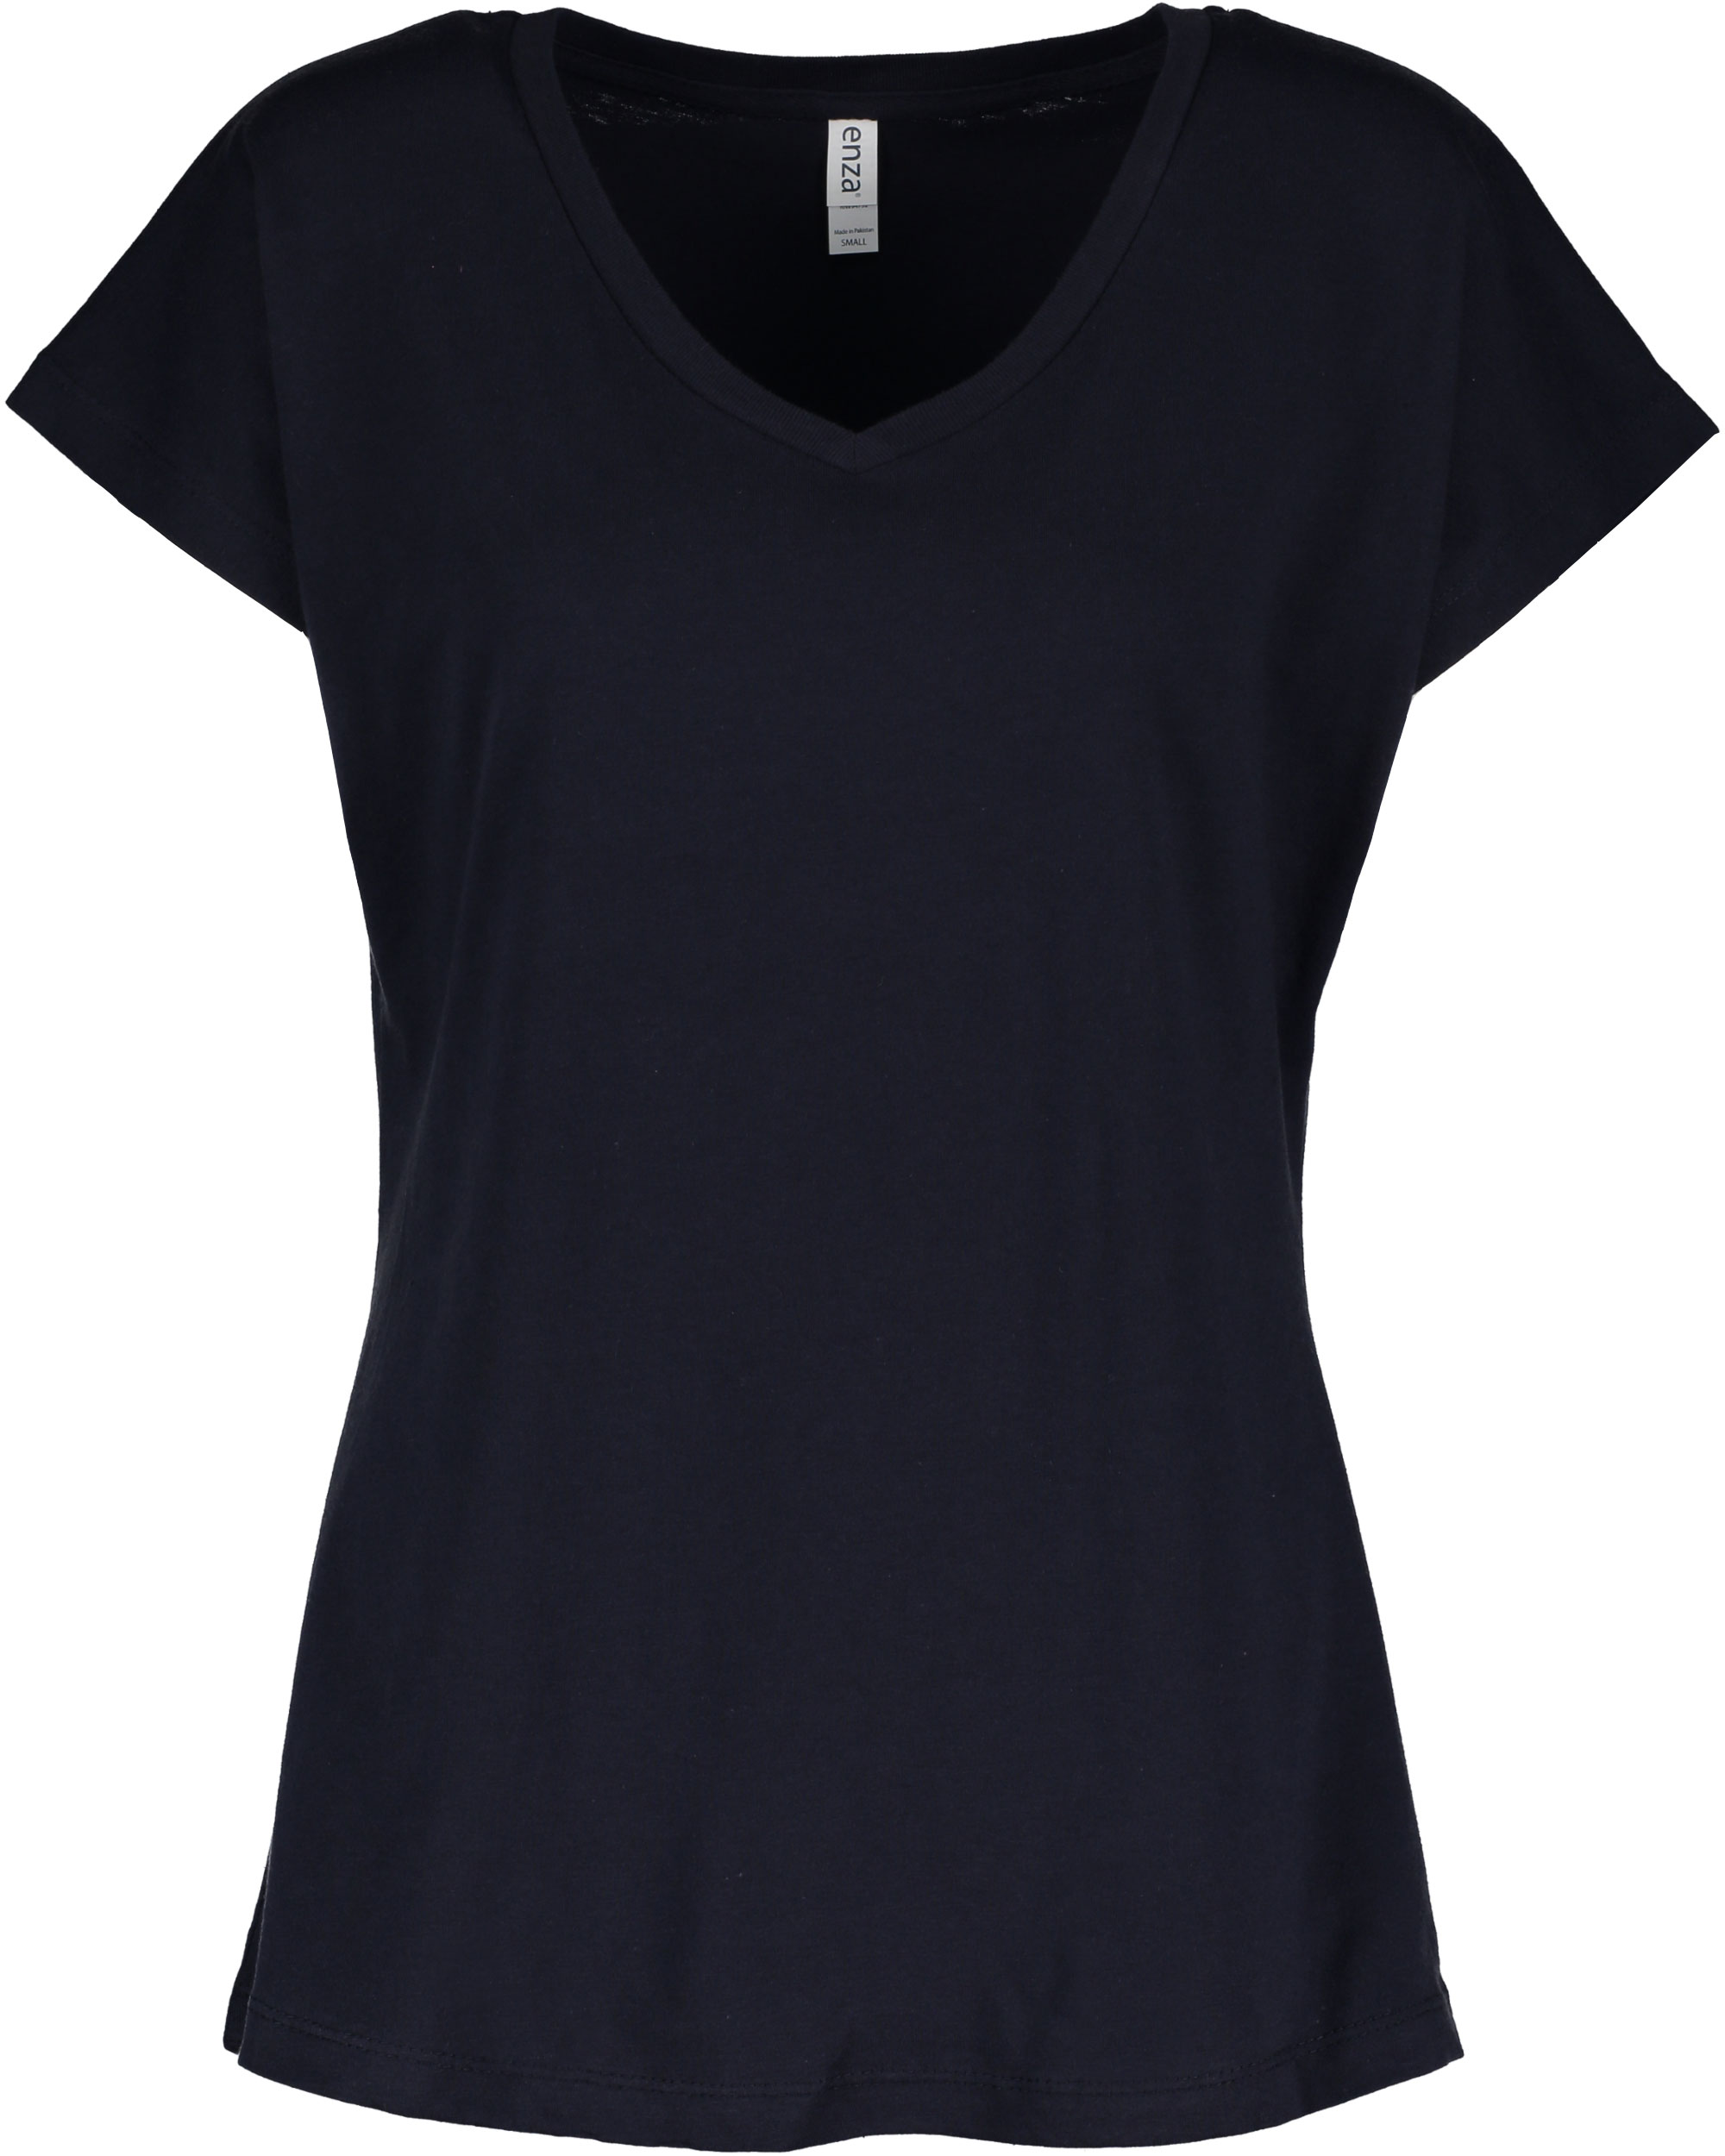 Enza® 04079 Ladies Essential Slouch V-Neck Tee